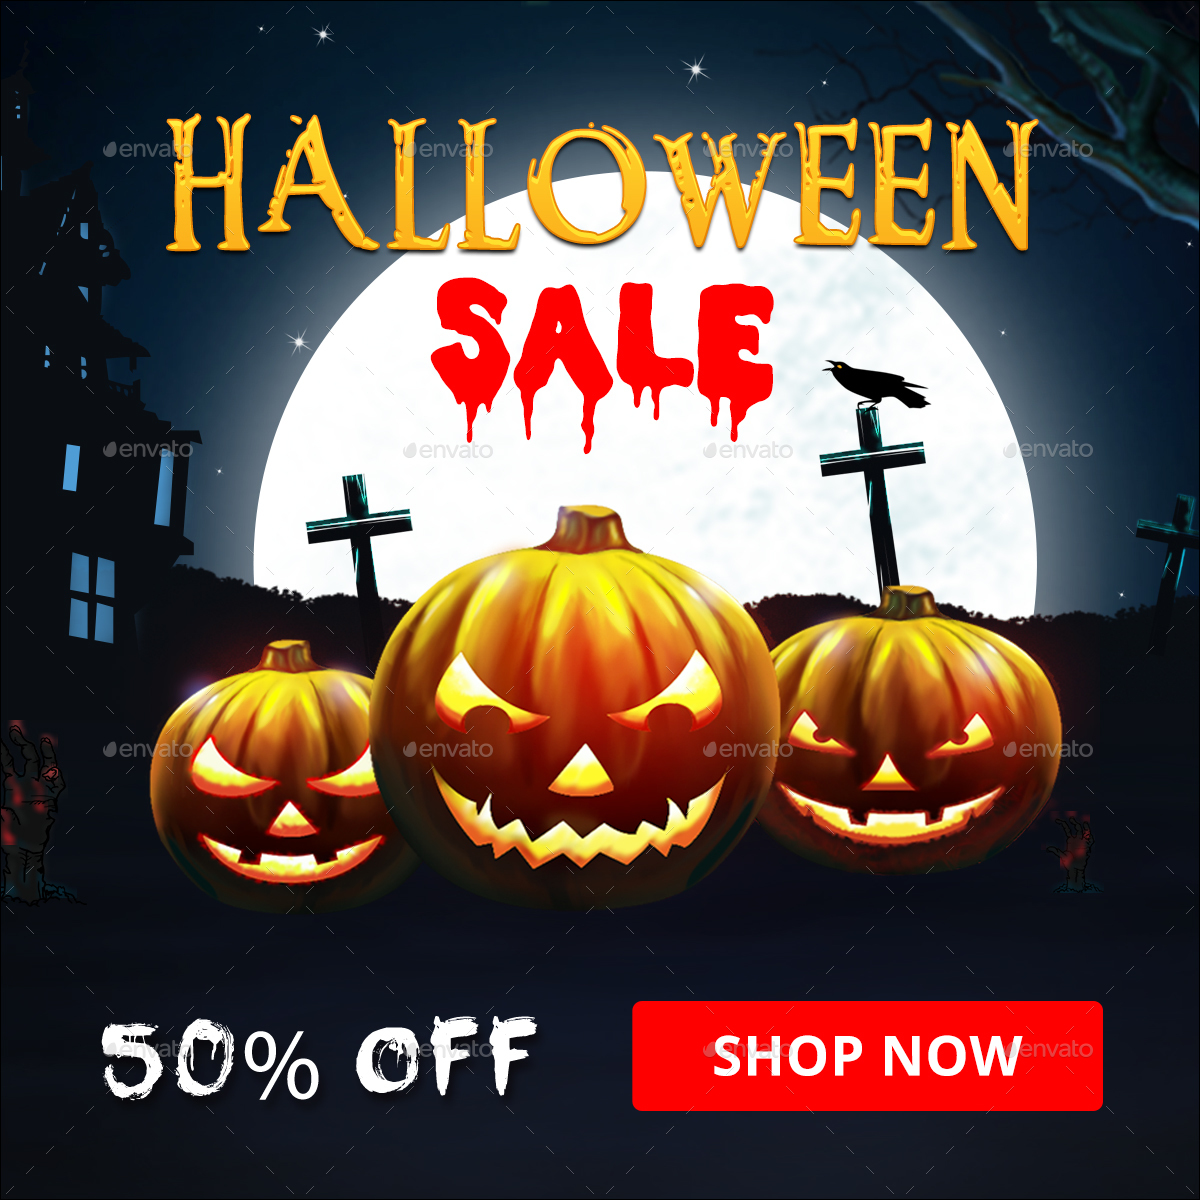 Halloween Banners by Hyov | GraphicRiver